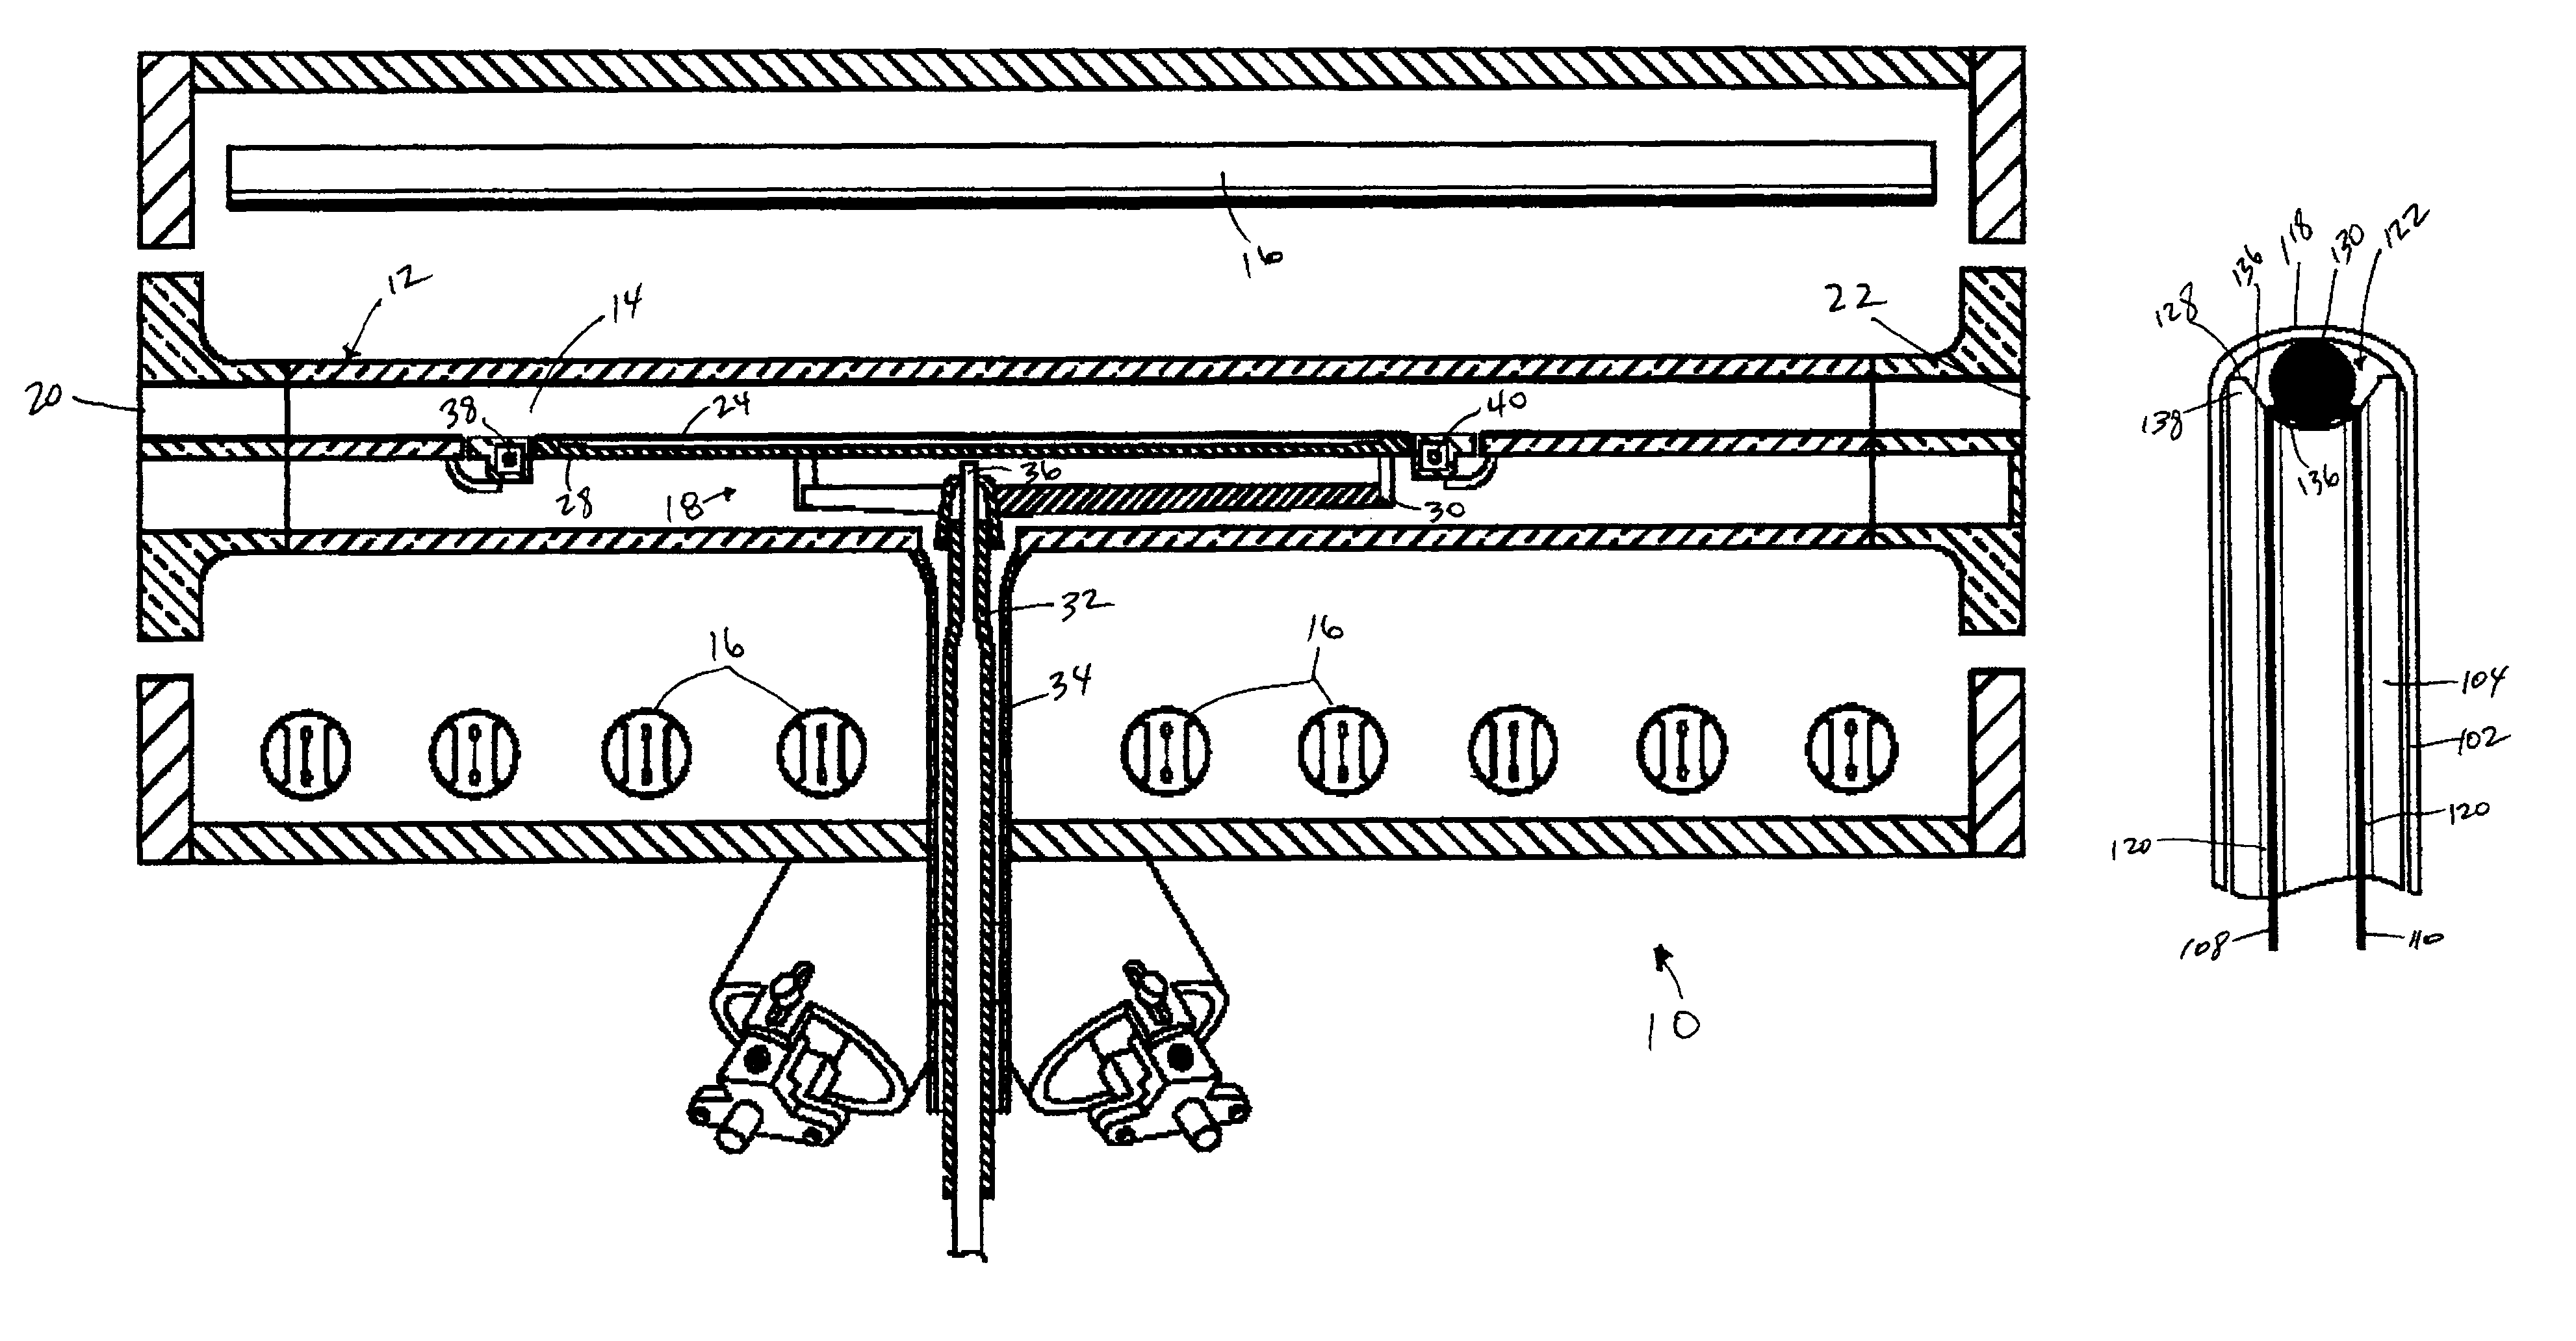 Thermocouple assembly with guarded thermocouple junction